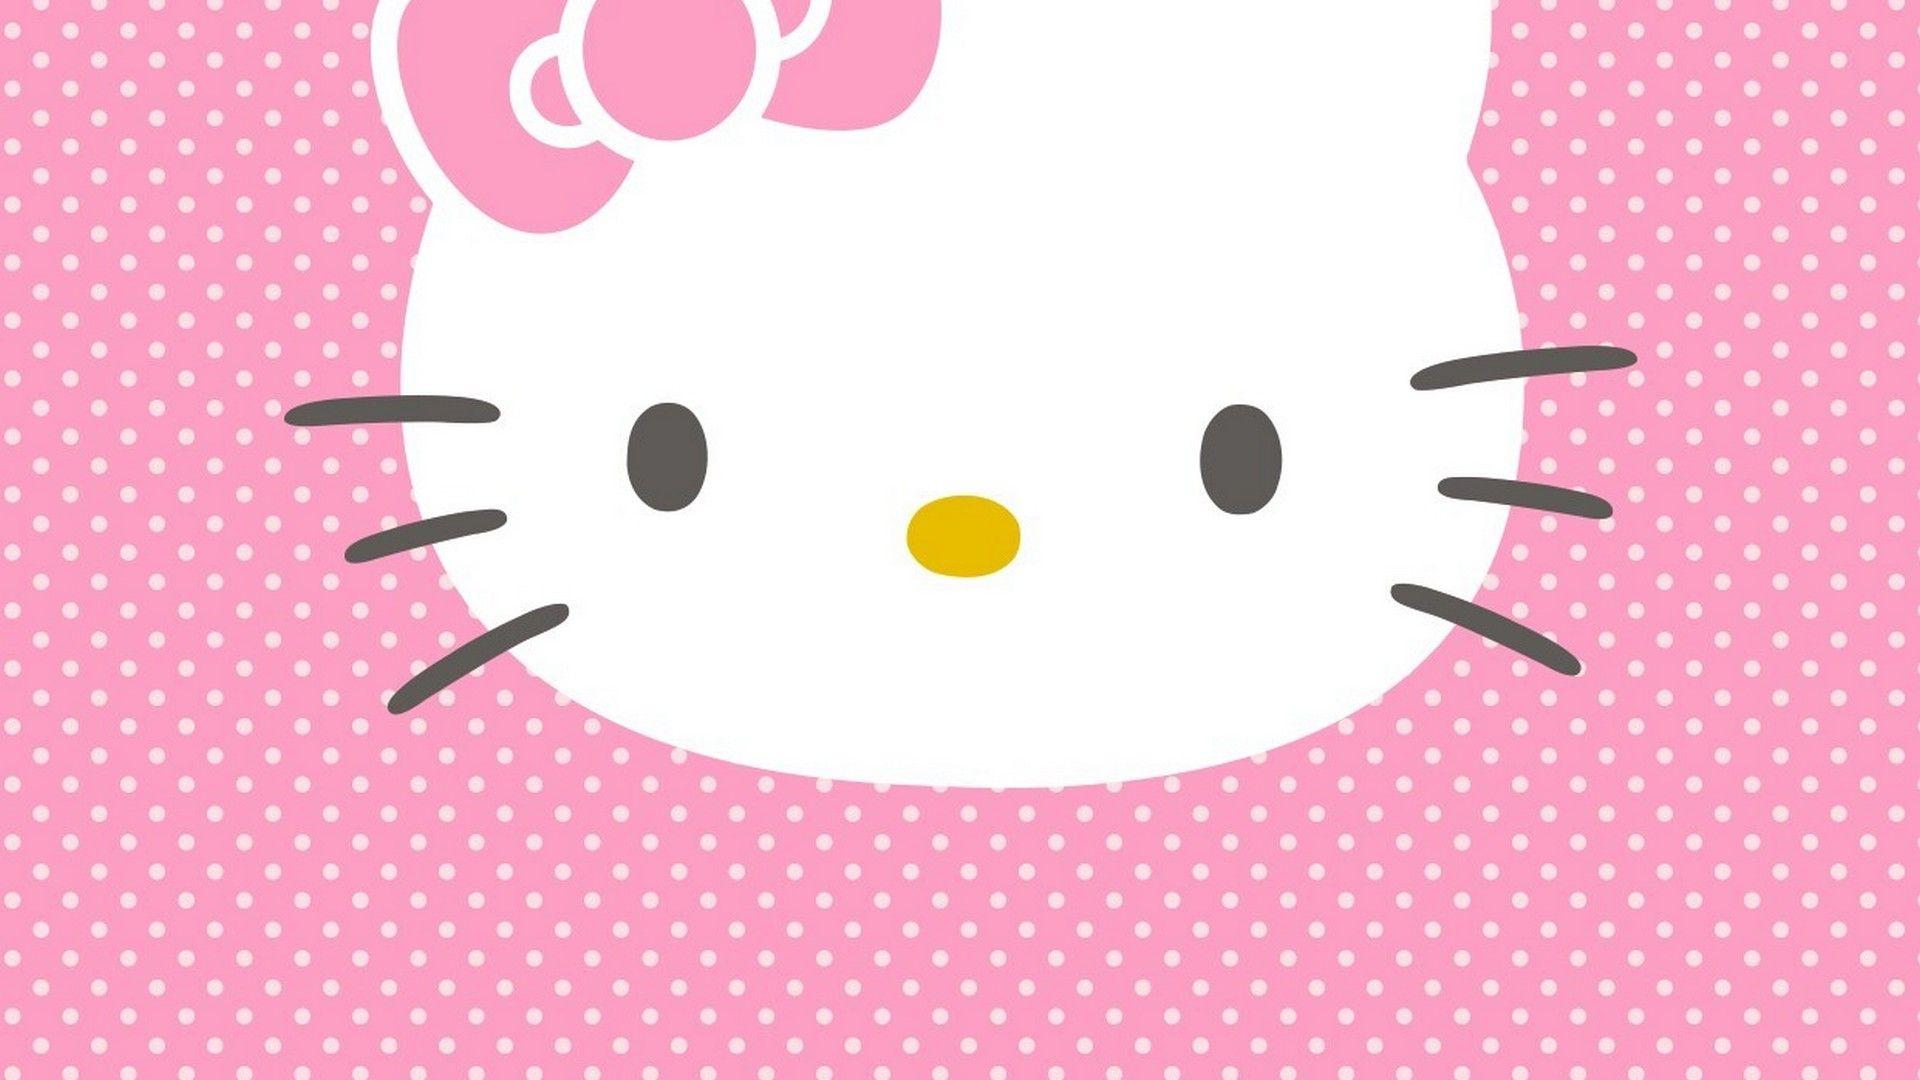 Hello Kitty Picture Desktop Background Live Wallpaper HD. Hello kitty wallpaper hd, Hello kitty wallpaper, Hello kitty background